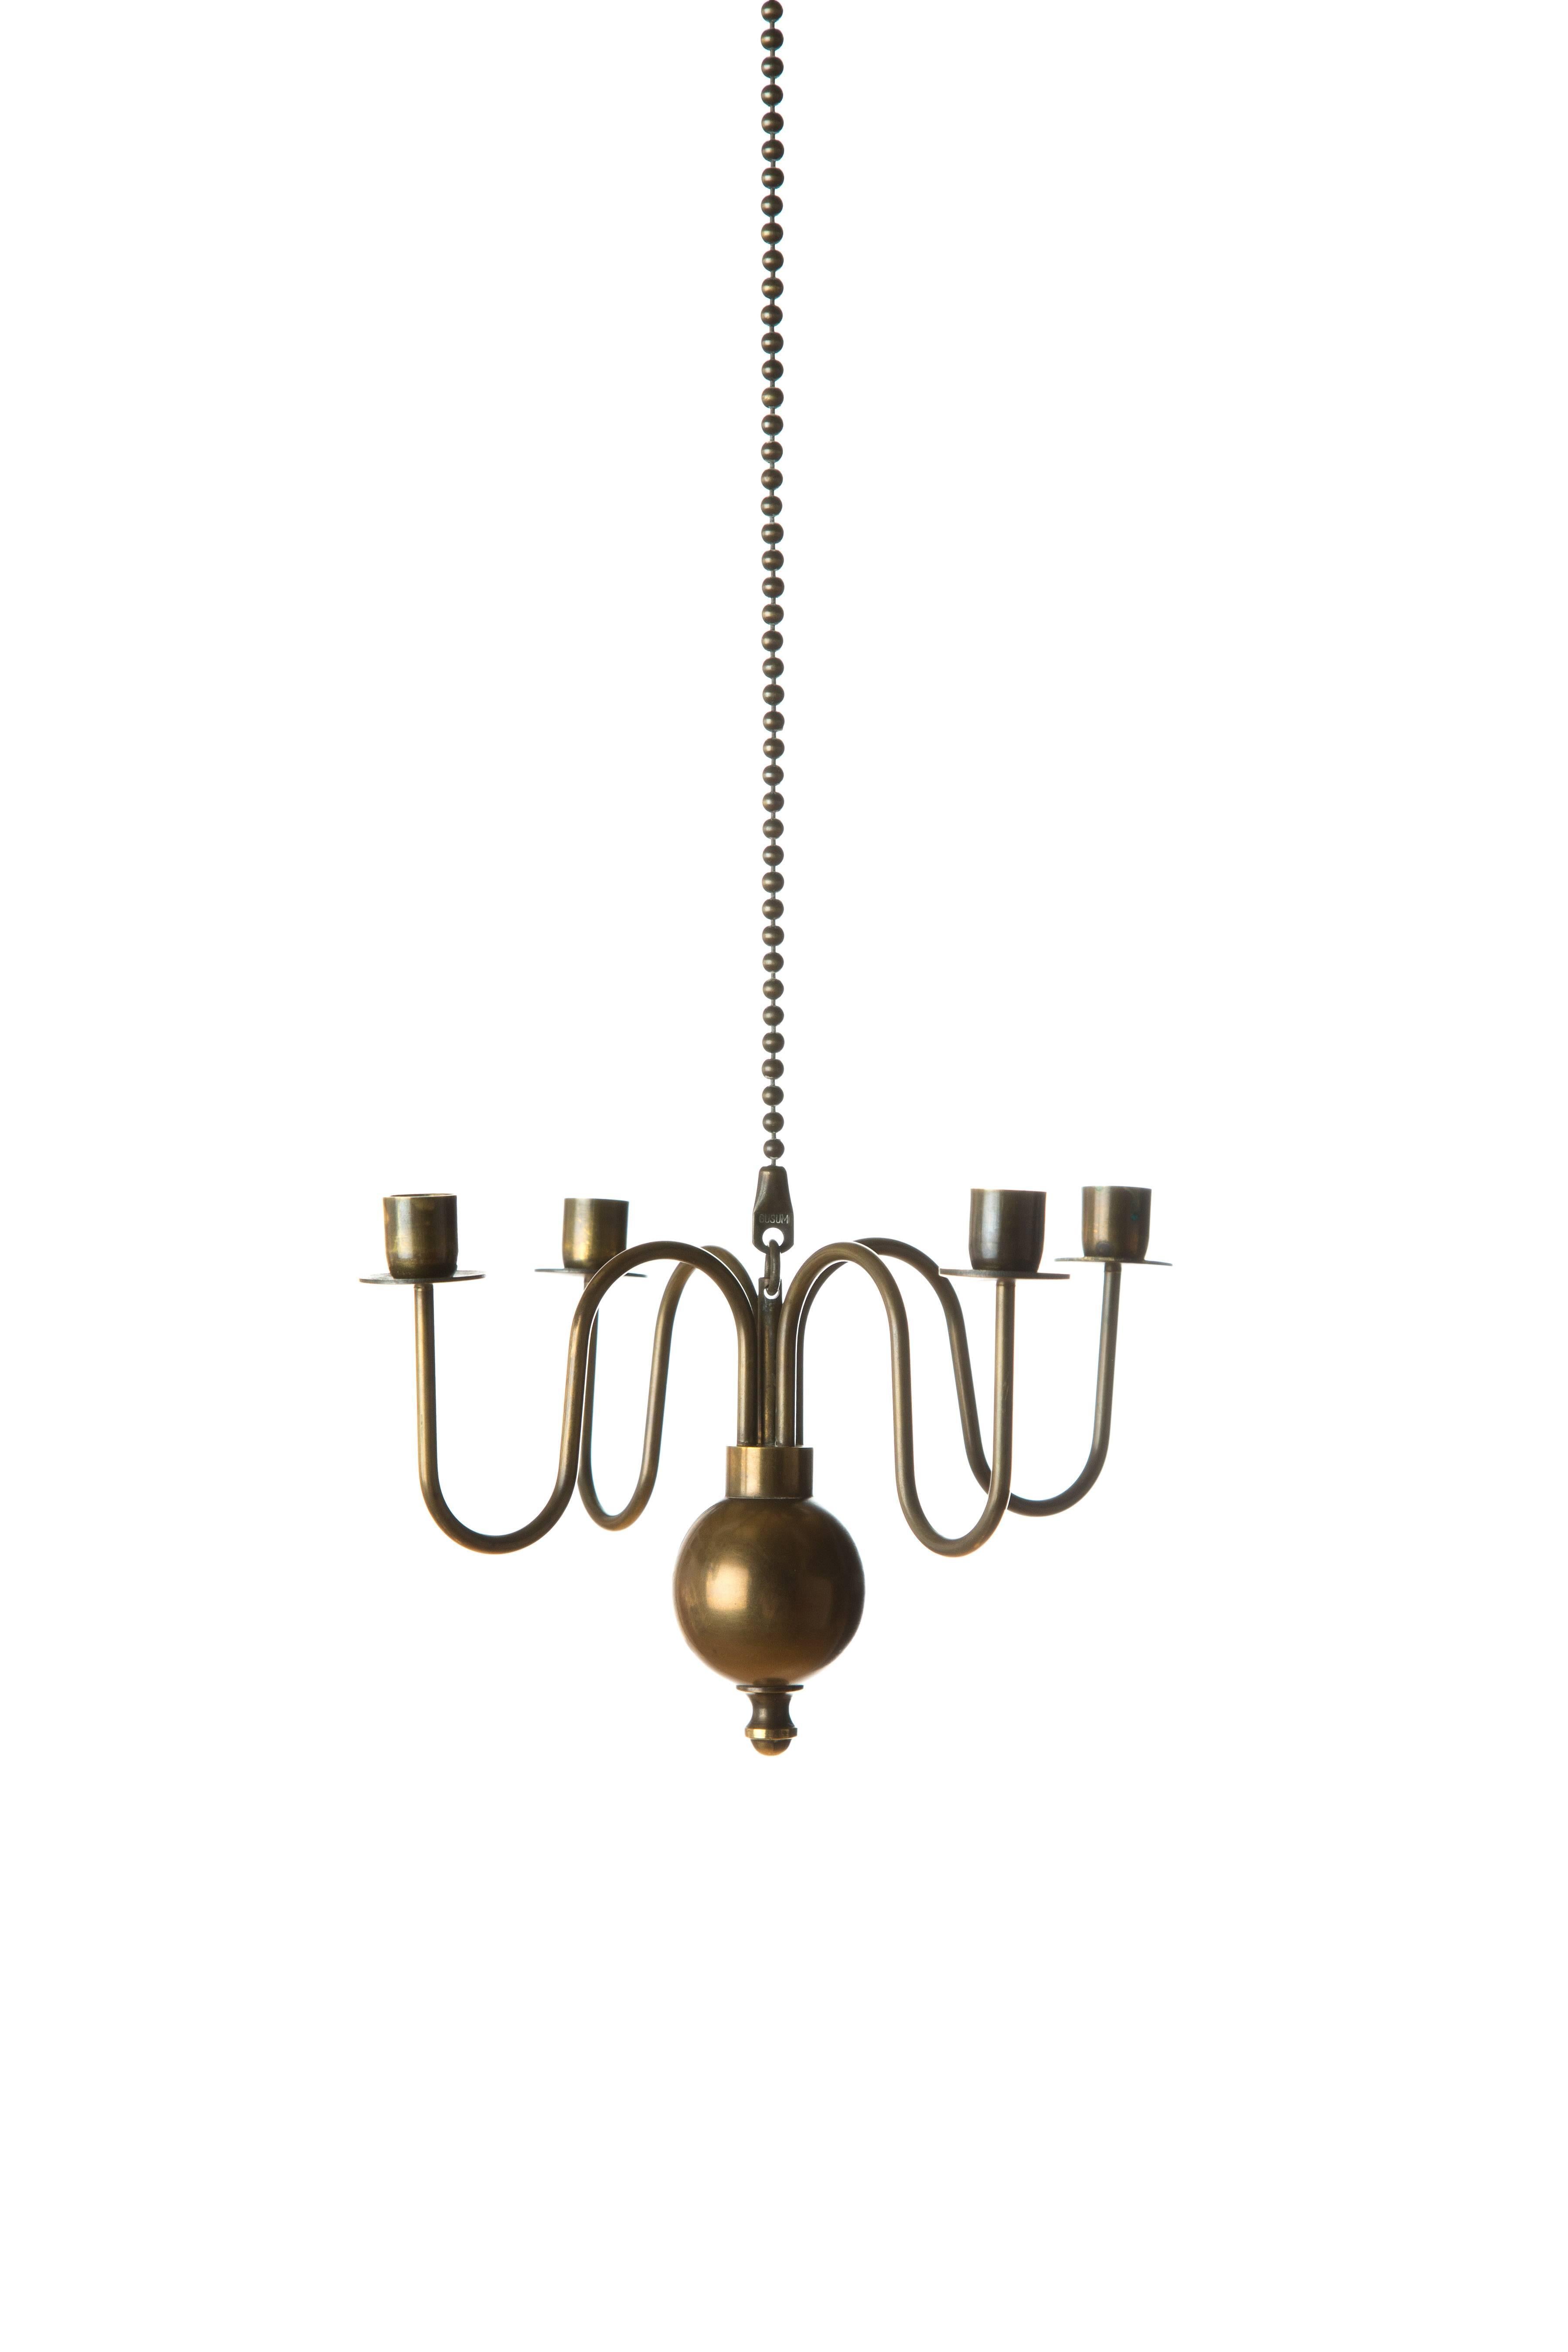 A copper candle pendant designed by Gunnar Ander for Ystad Metal Gusum. Elegant by form and material. Haevy ball and long cable. Measure: The total length is 80cm. Signed with Gusum.